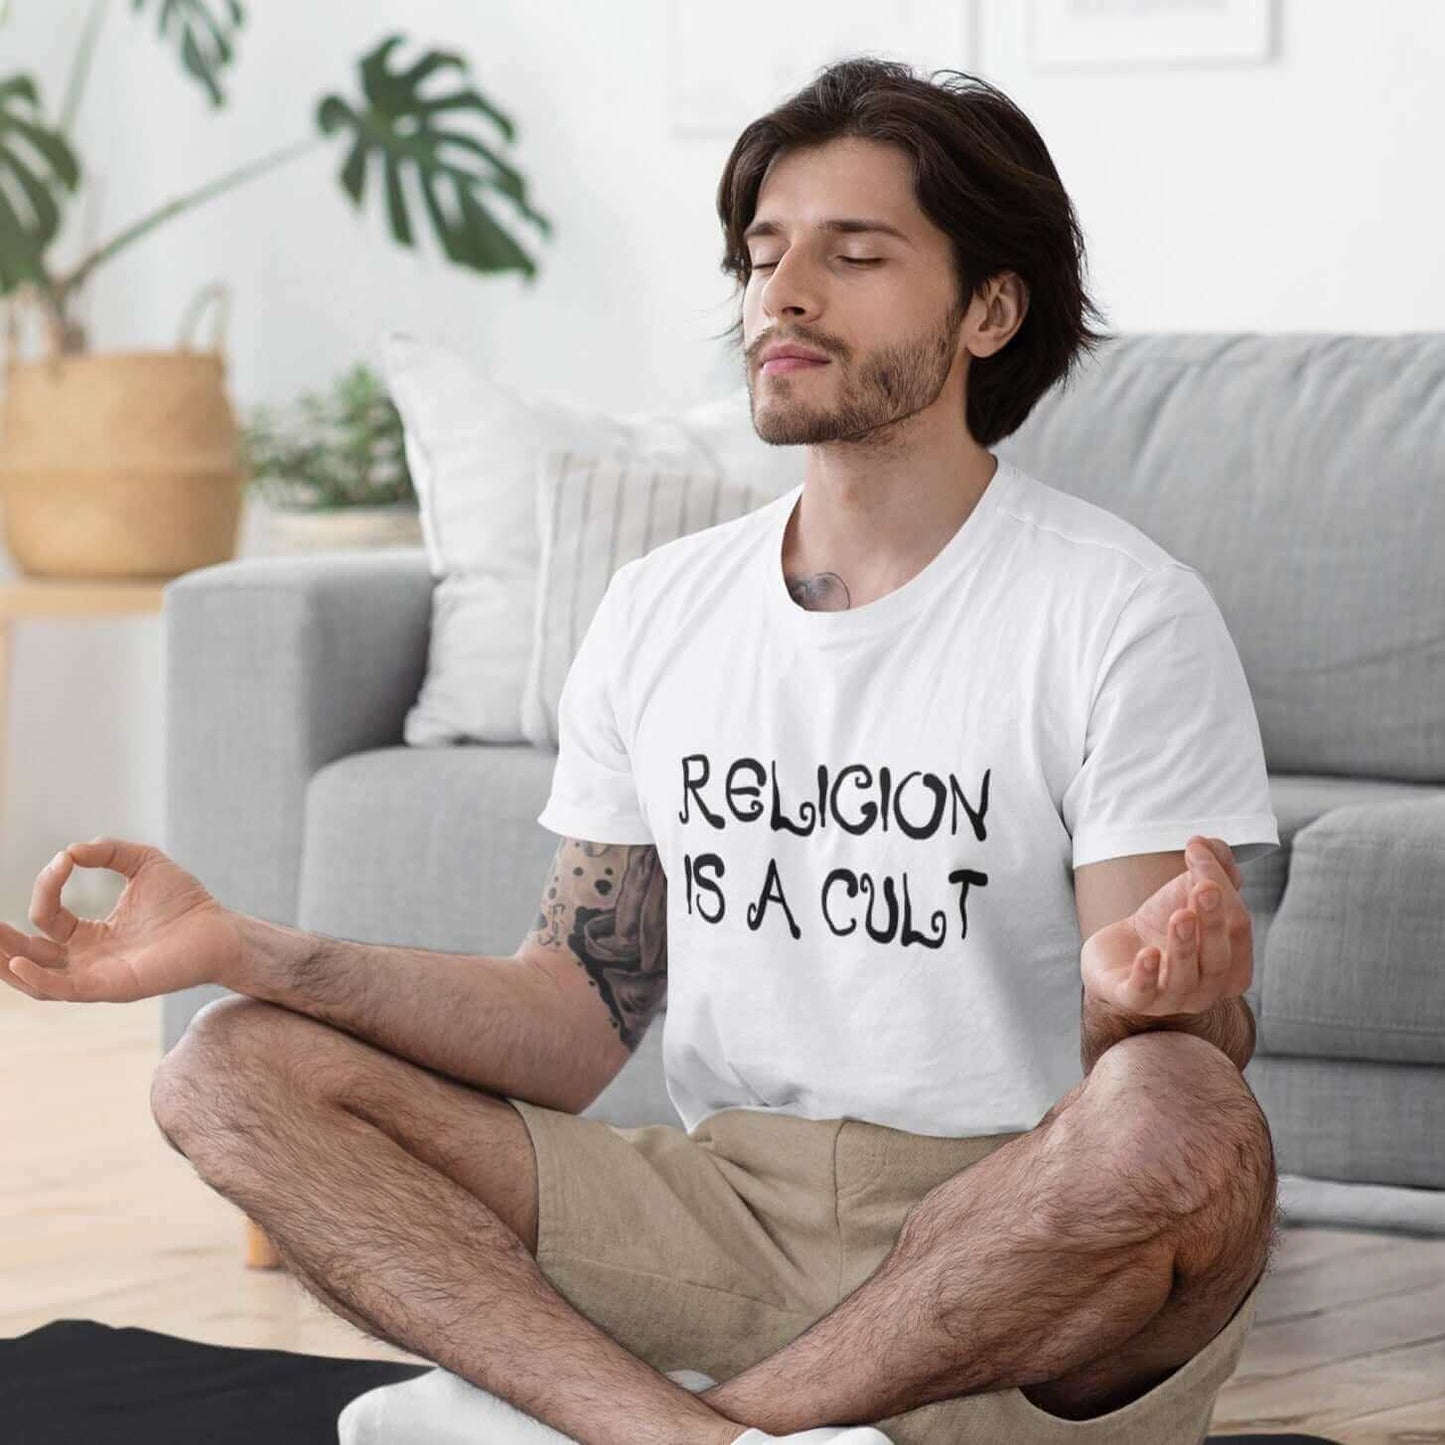 Religion is a cult t-shirt